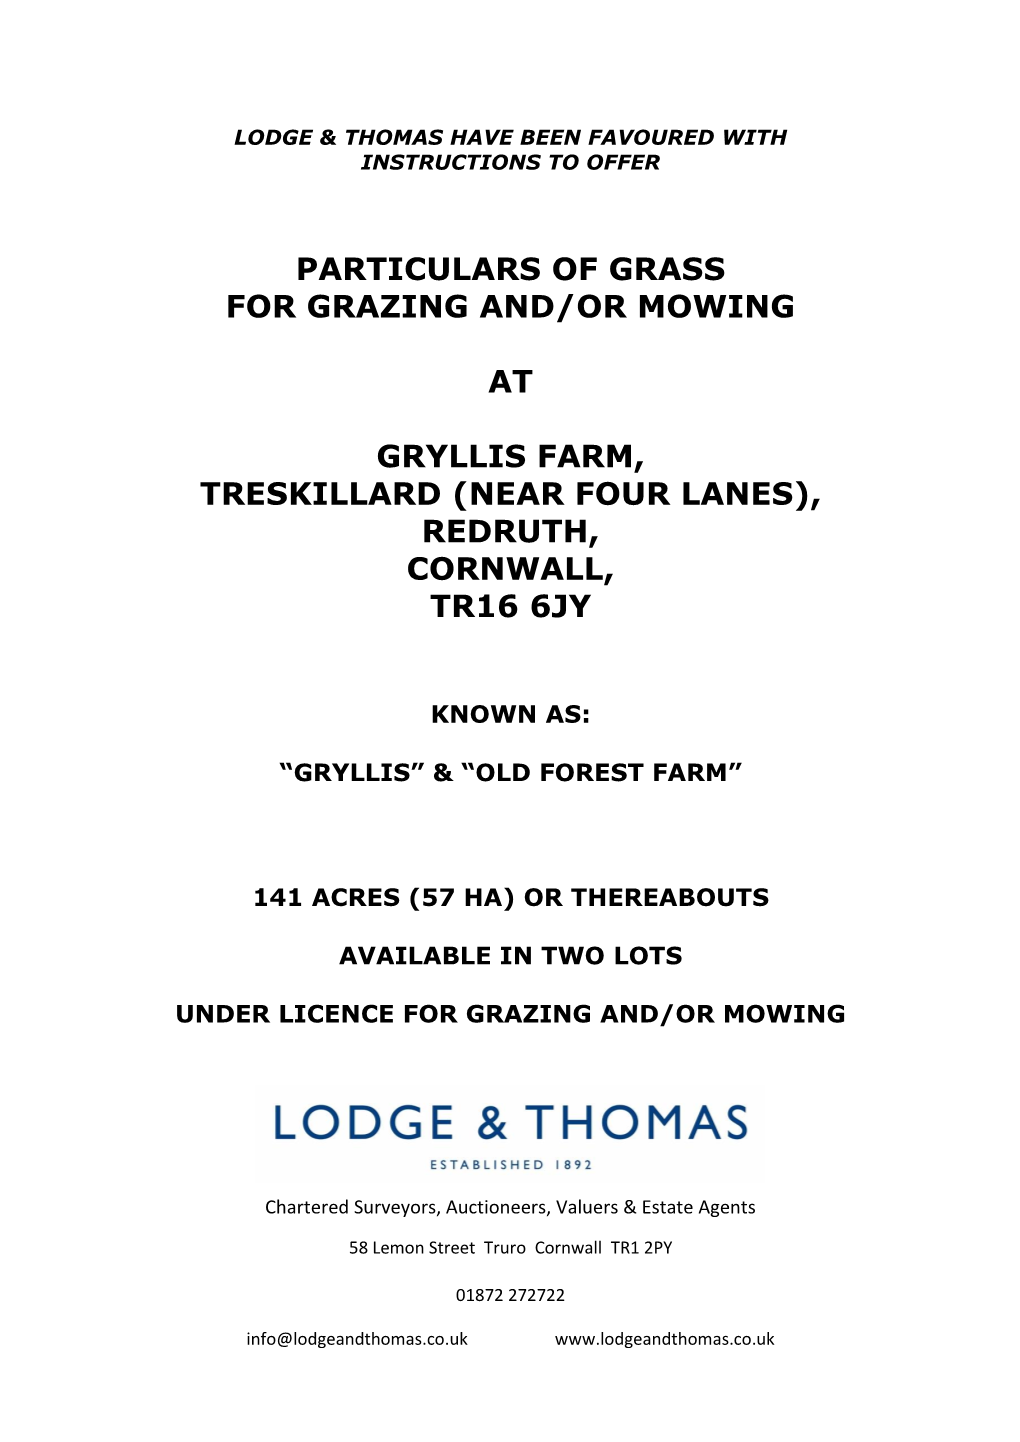 Particulars of Grass for Grazing And/Or Mowing at Gryllis Farm, Treskillard